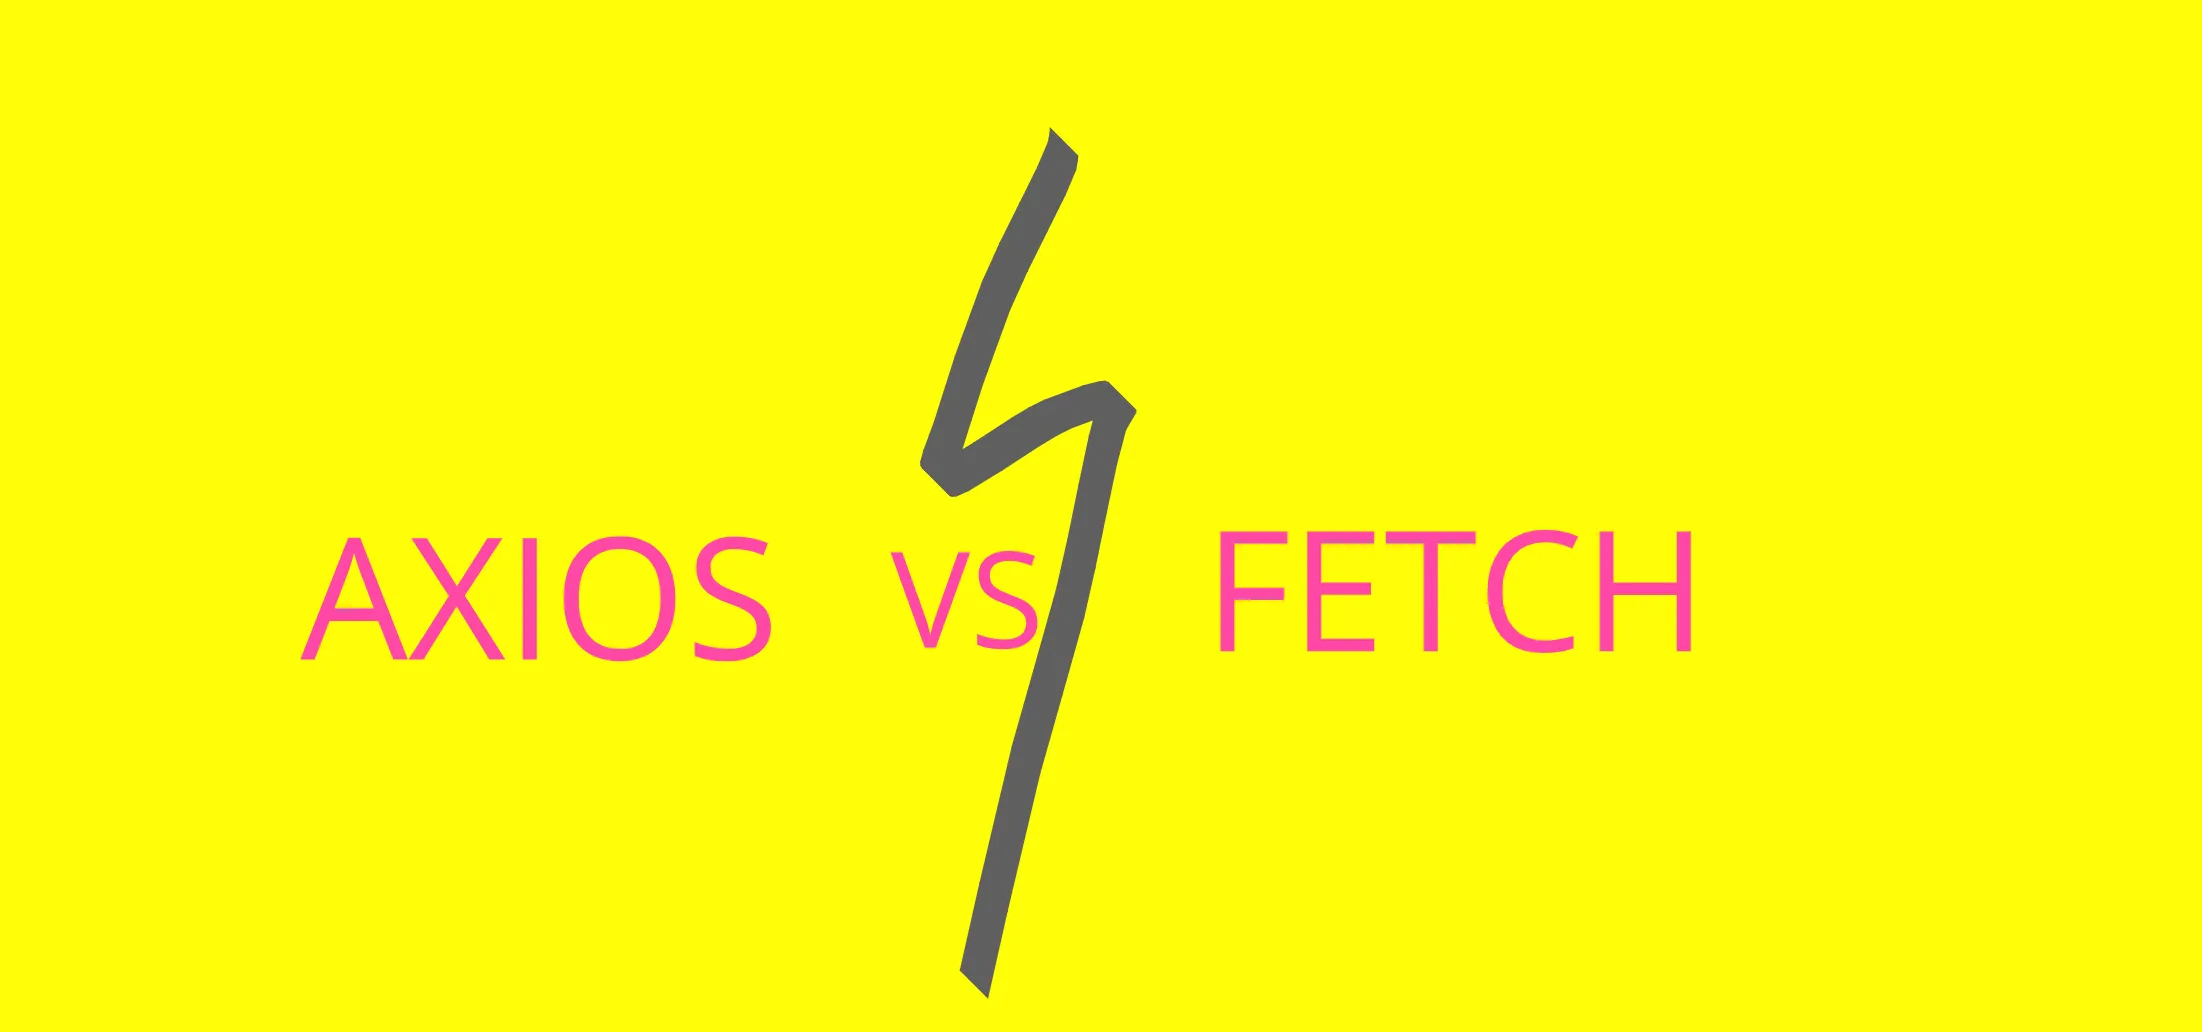 featured image - Axios or Fetch: What Is Better for HTTP Requests?